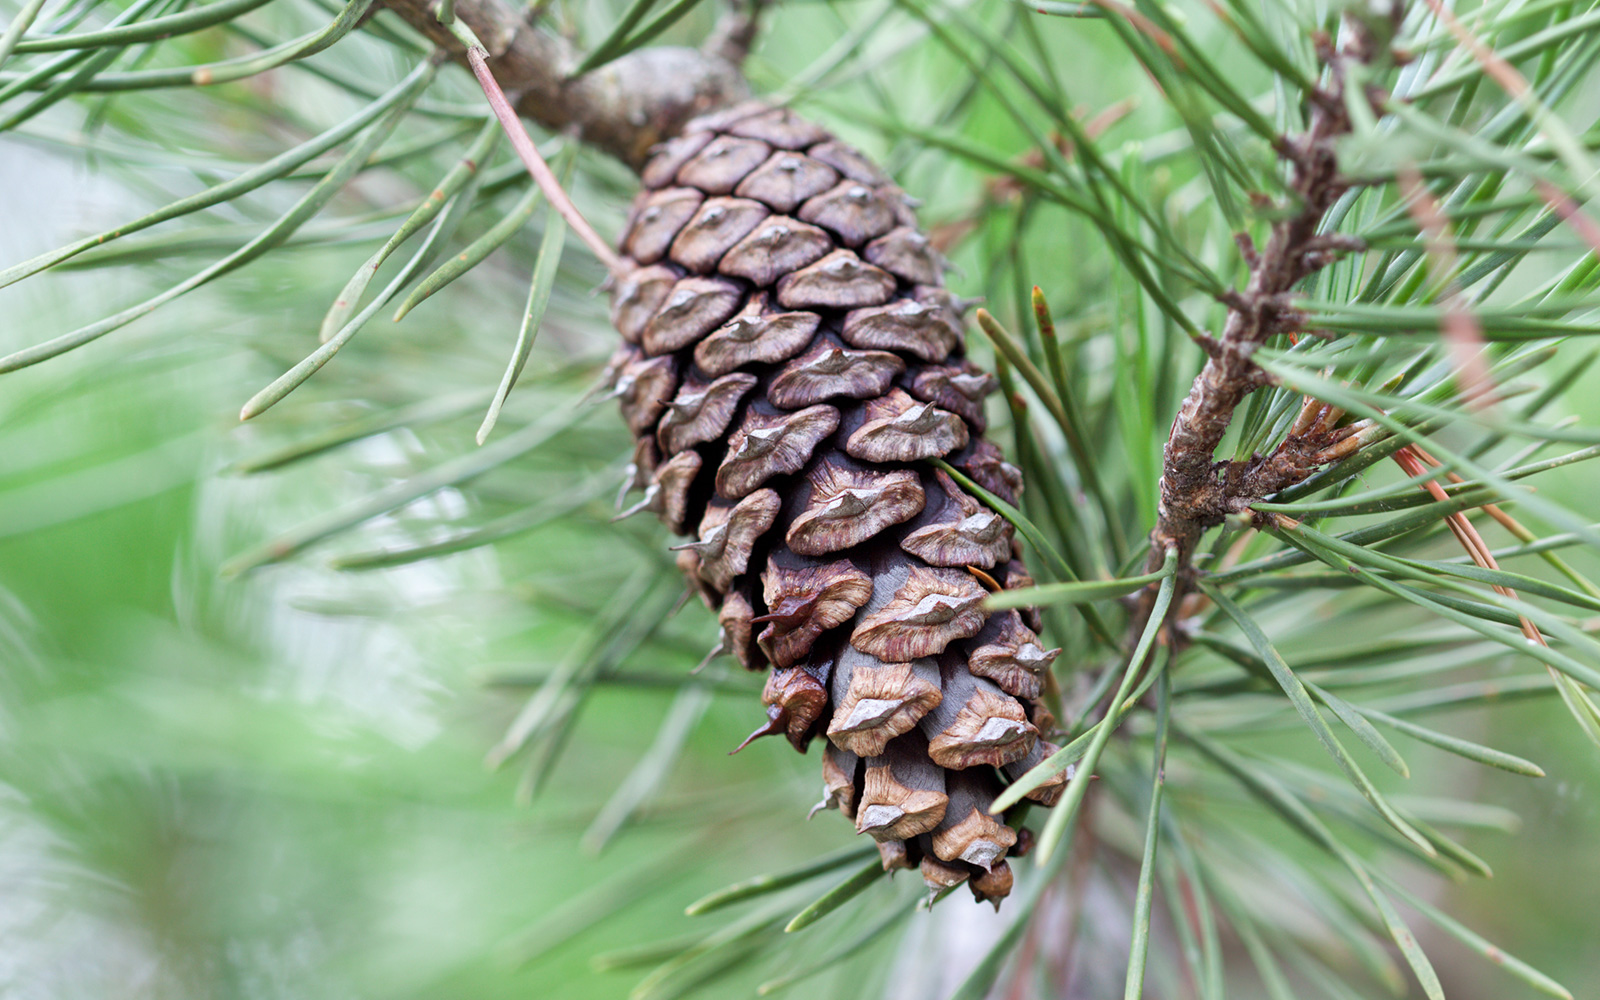 Close up view of pine cone hanging from a branch, surrounded by green pine needles